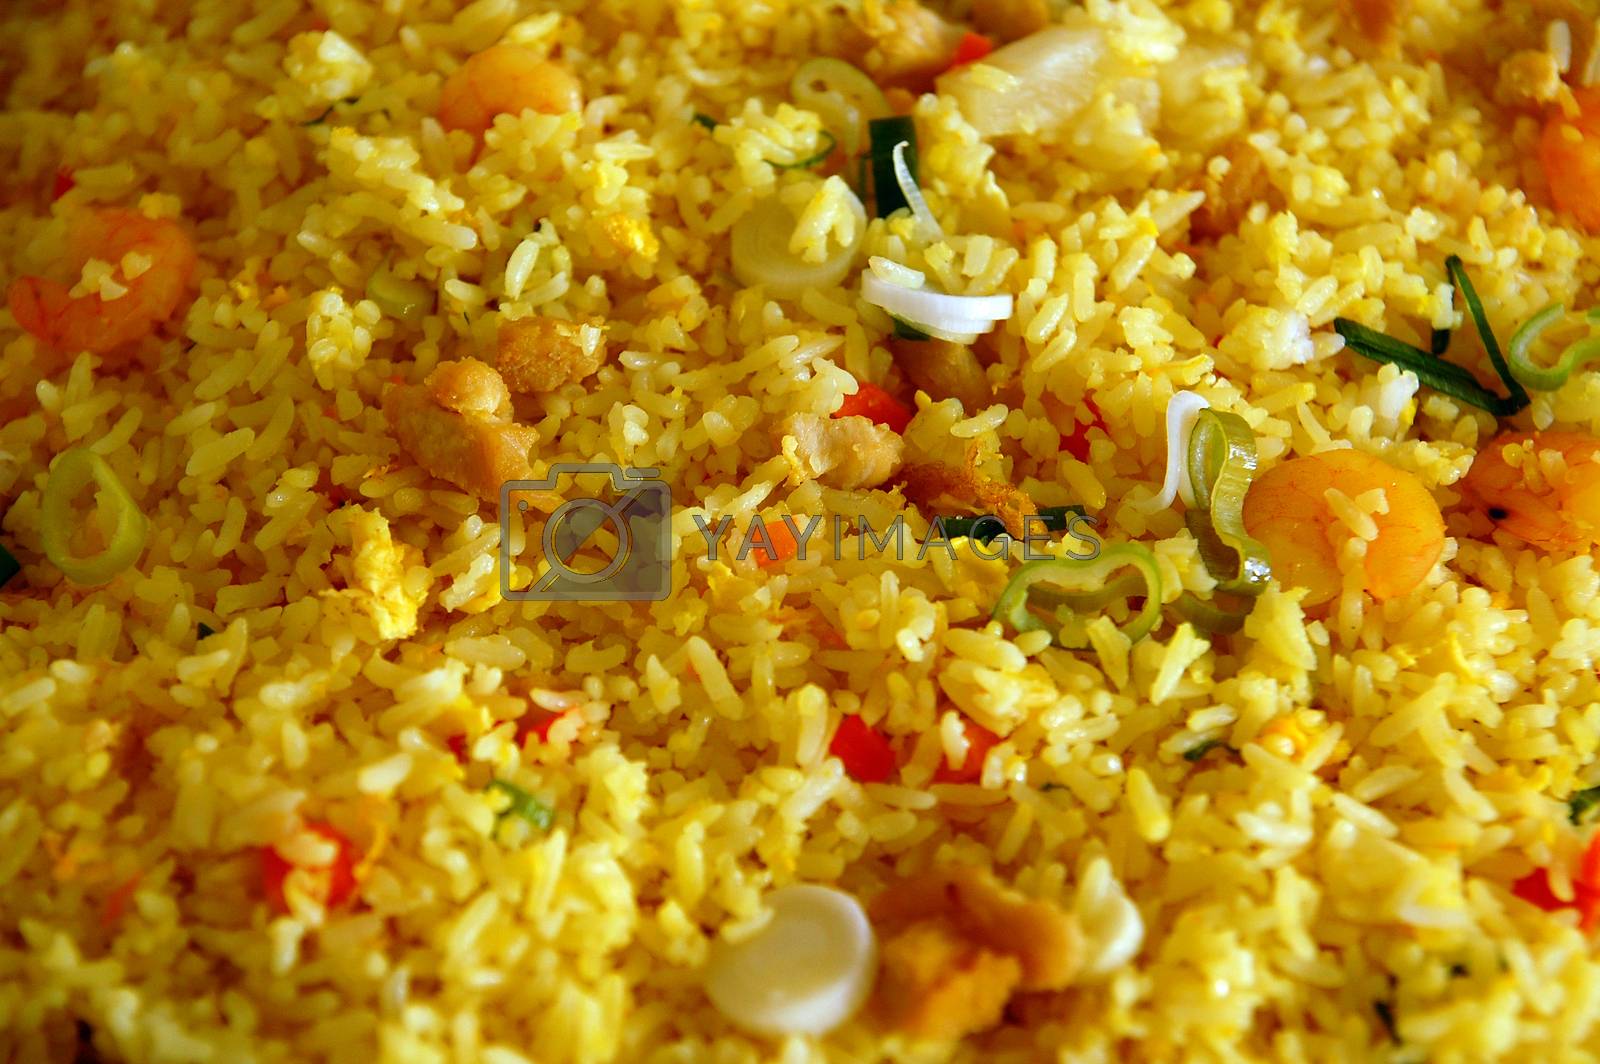 Royalty free image of Yang Chow Chinese mix fried rice meal by imwaltersy